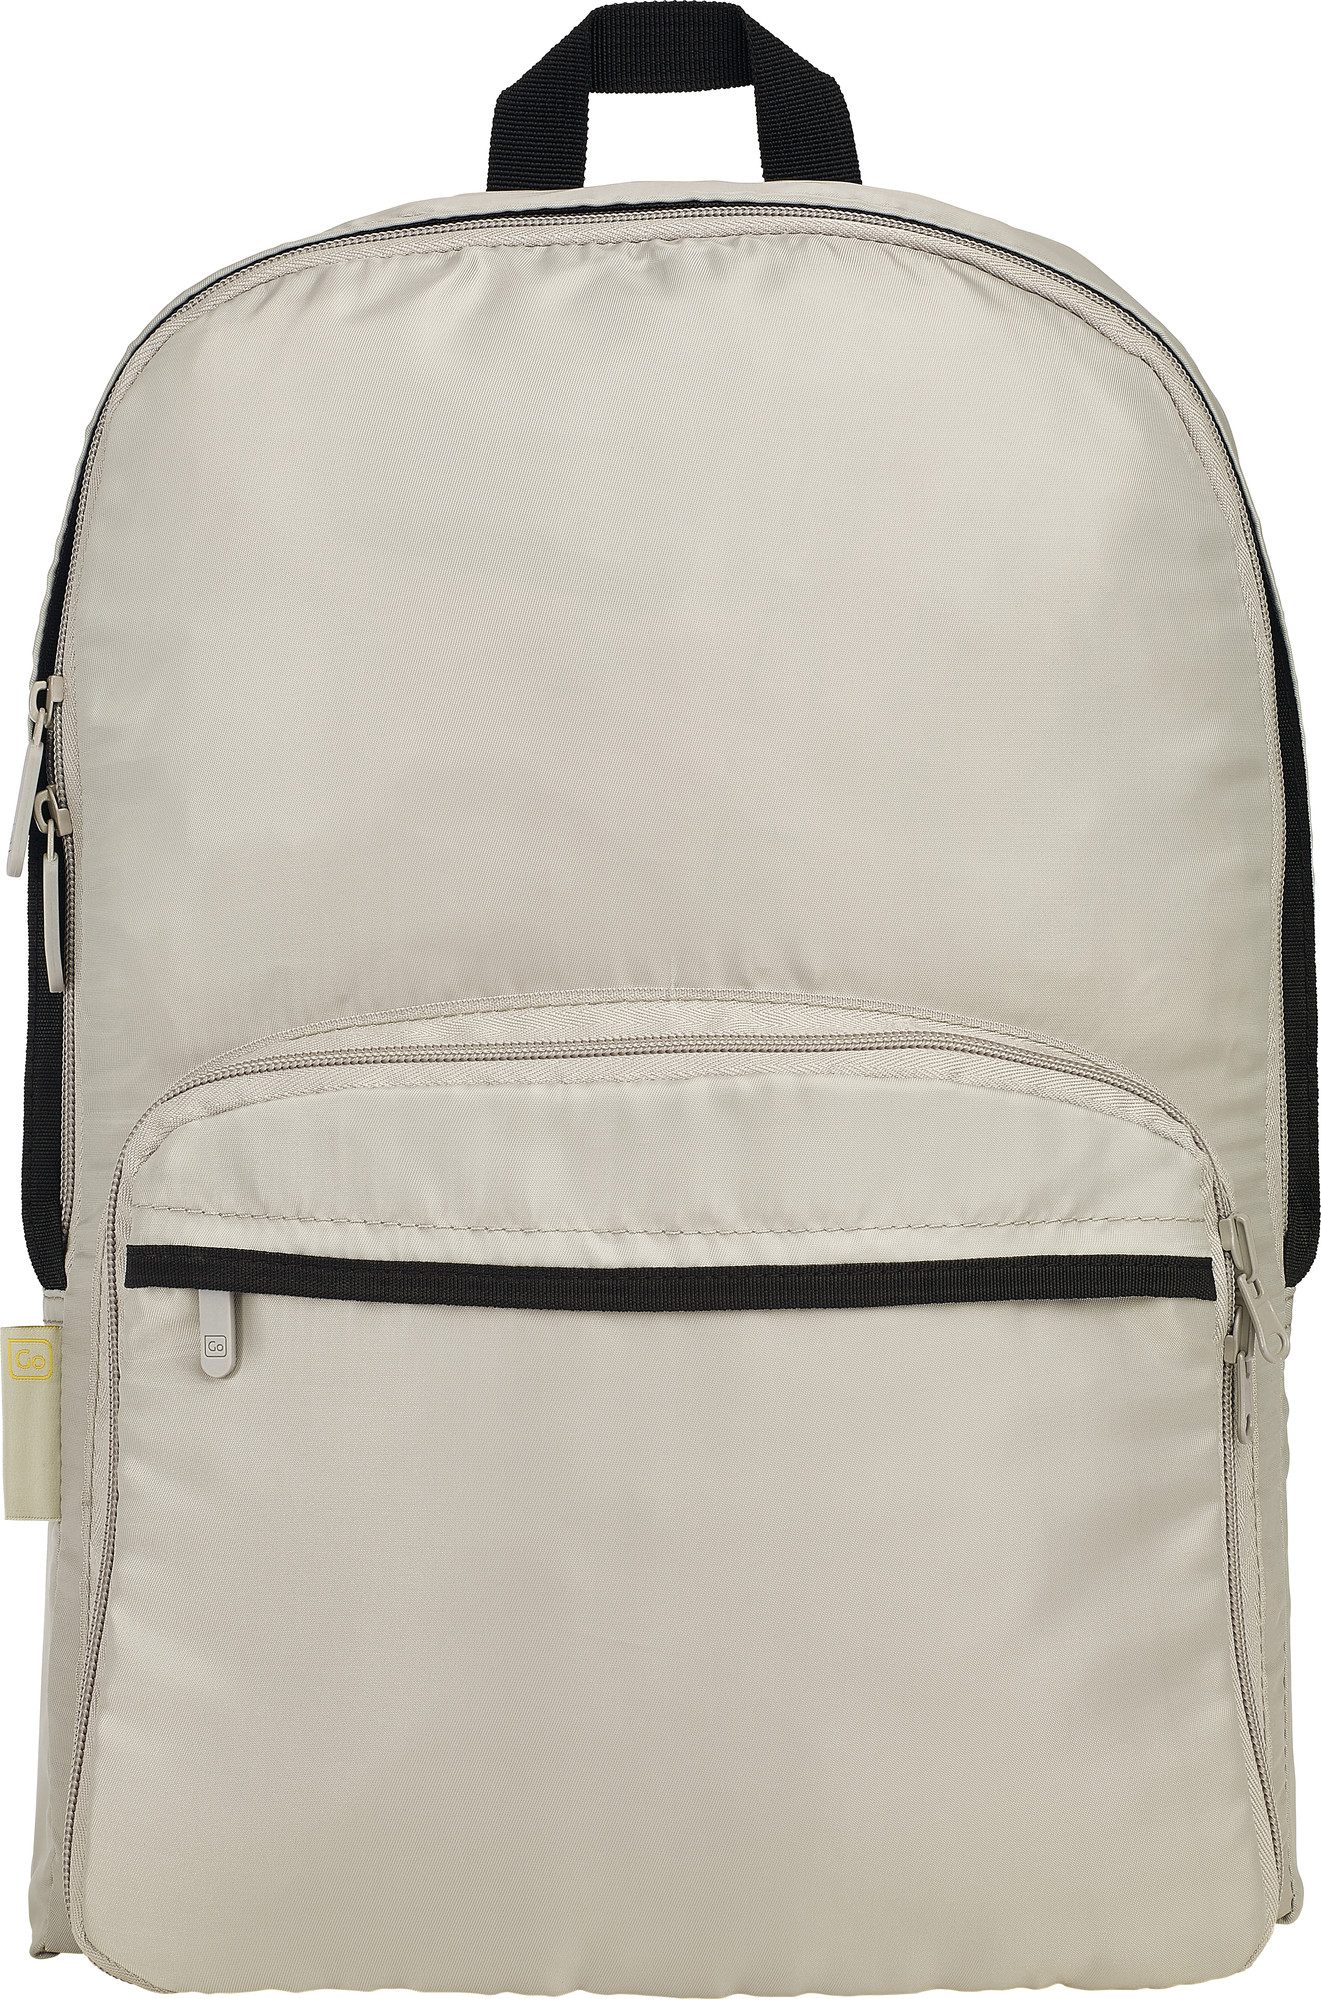 Picture of Go Travel Backpack (Light)